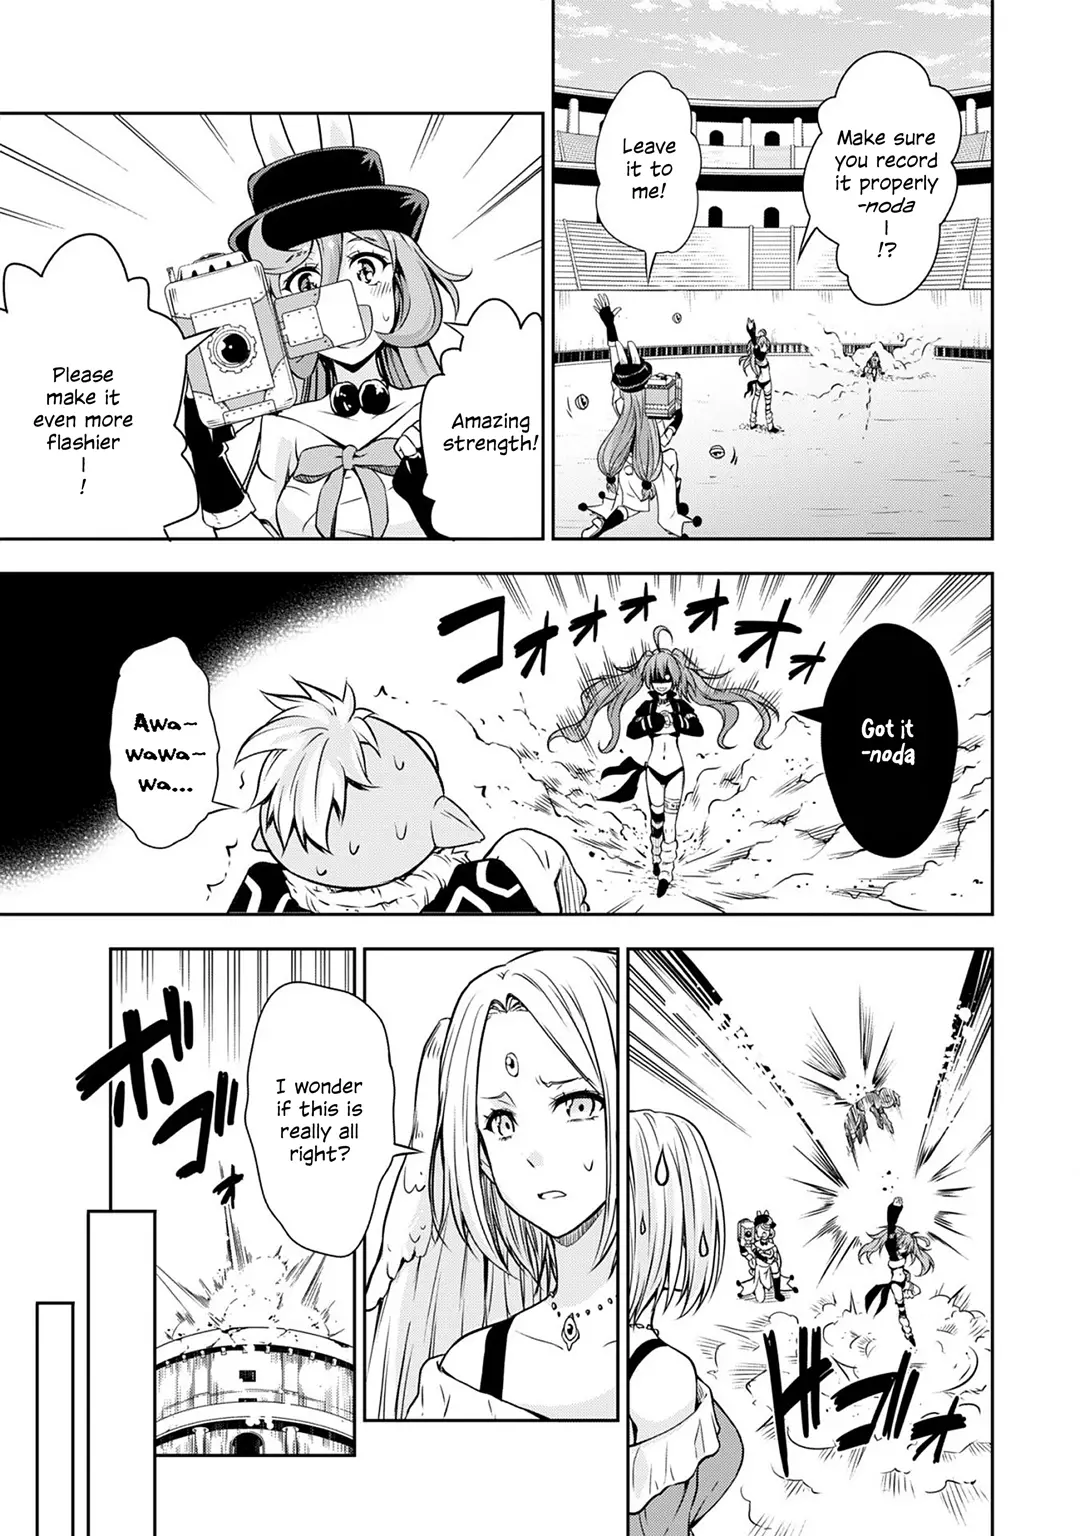 Tensei Shitara Slime Datta Ken: The Ways of Strolling in the Demon Country - 33 page 19